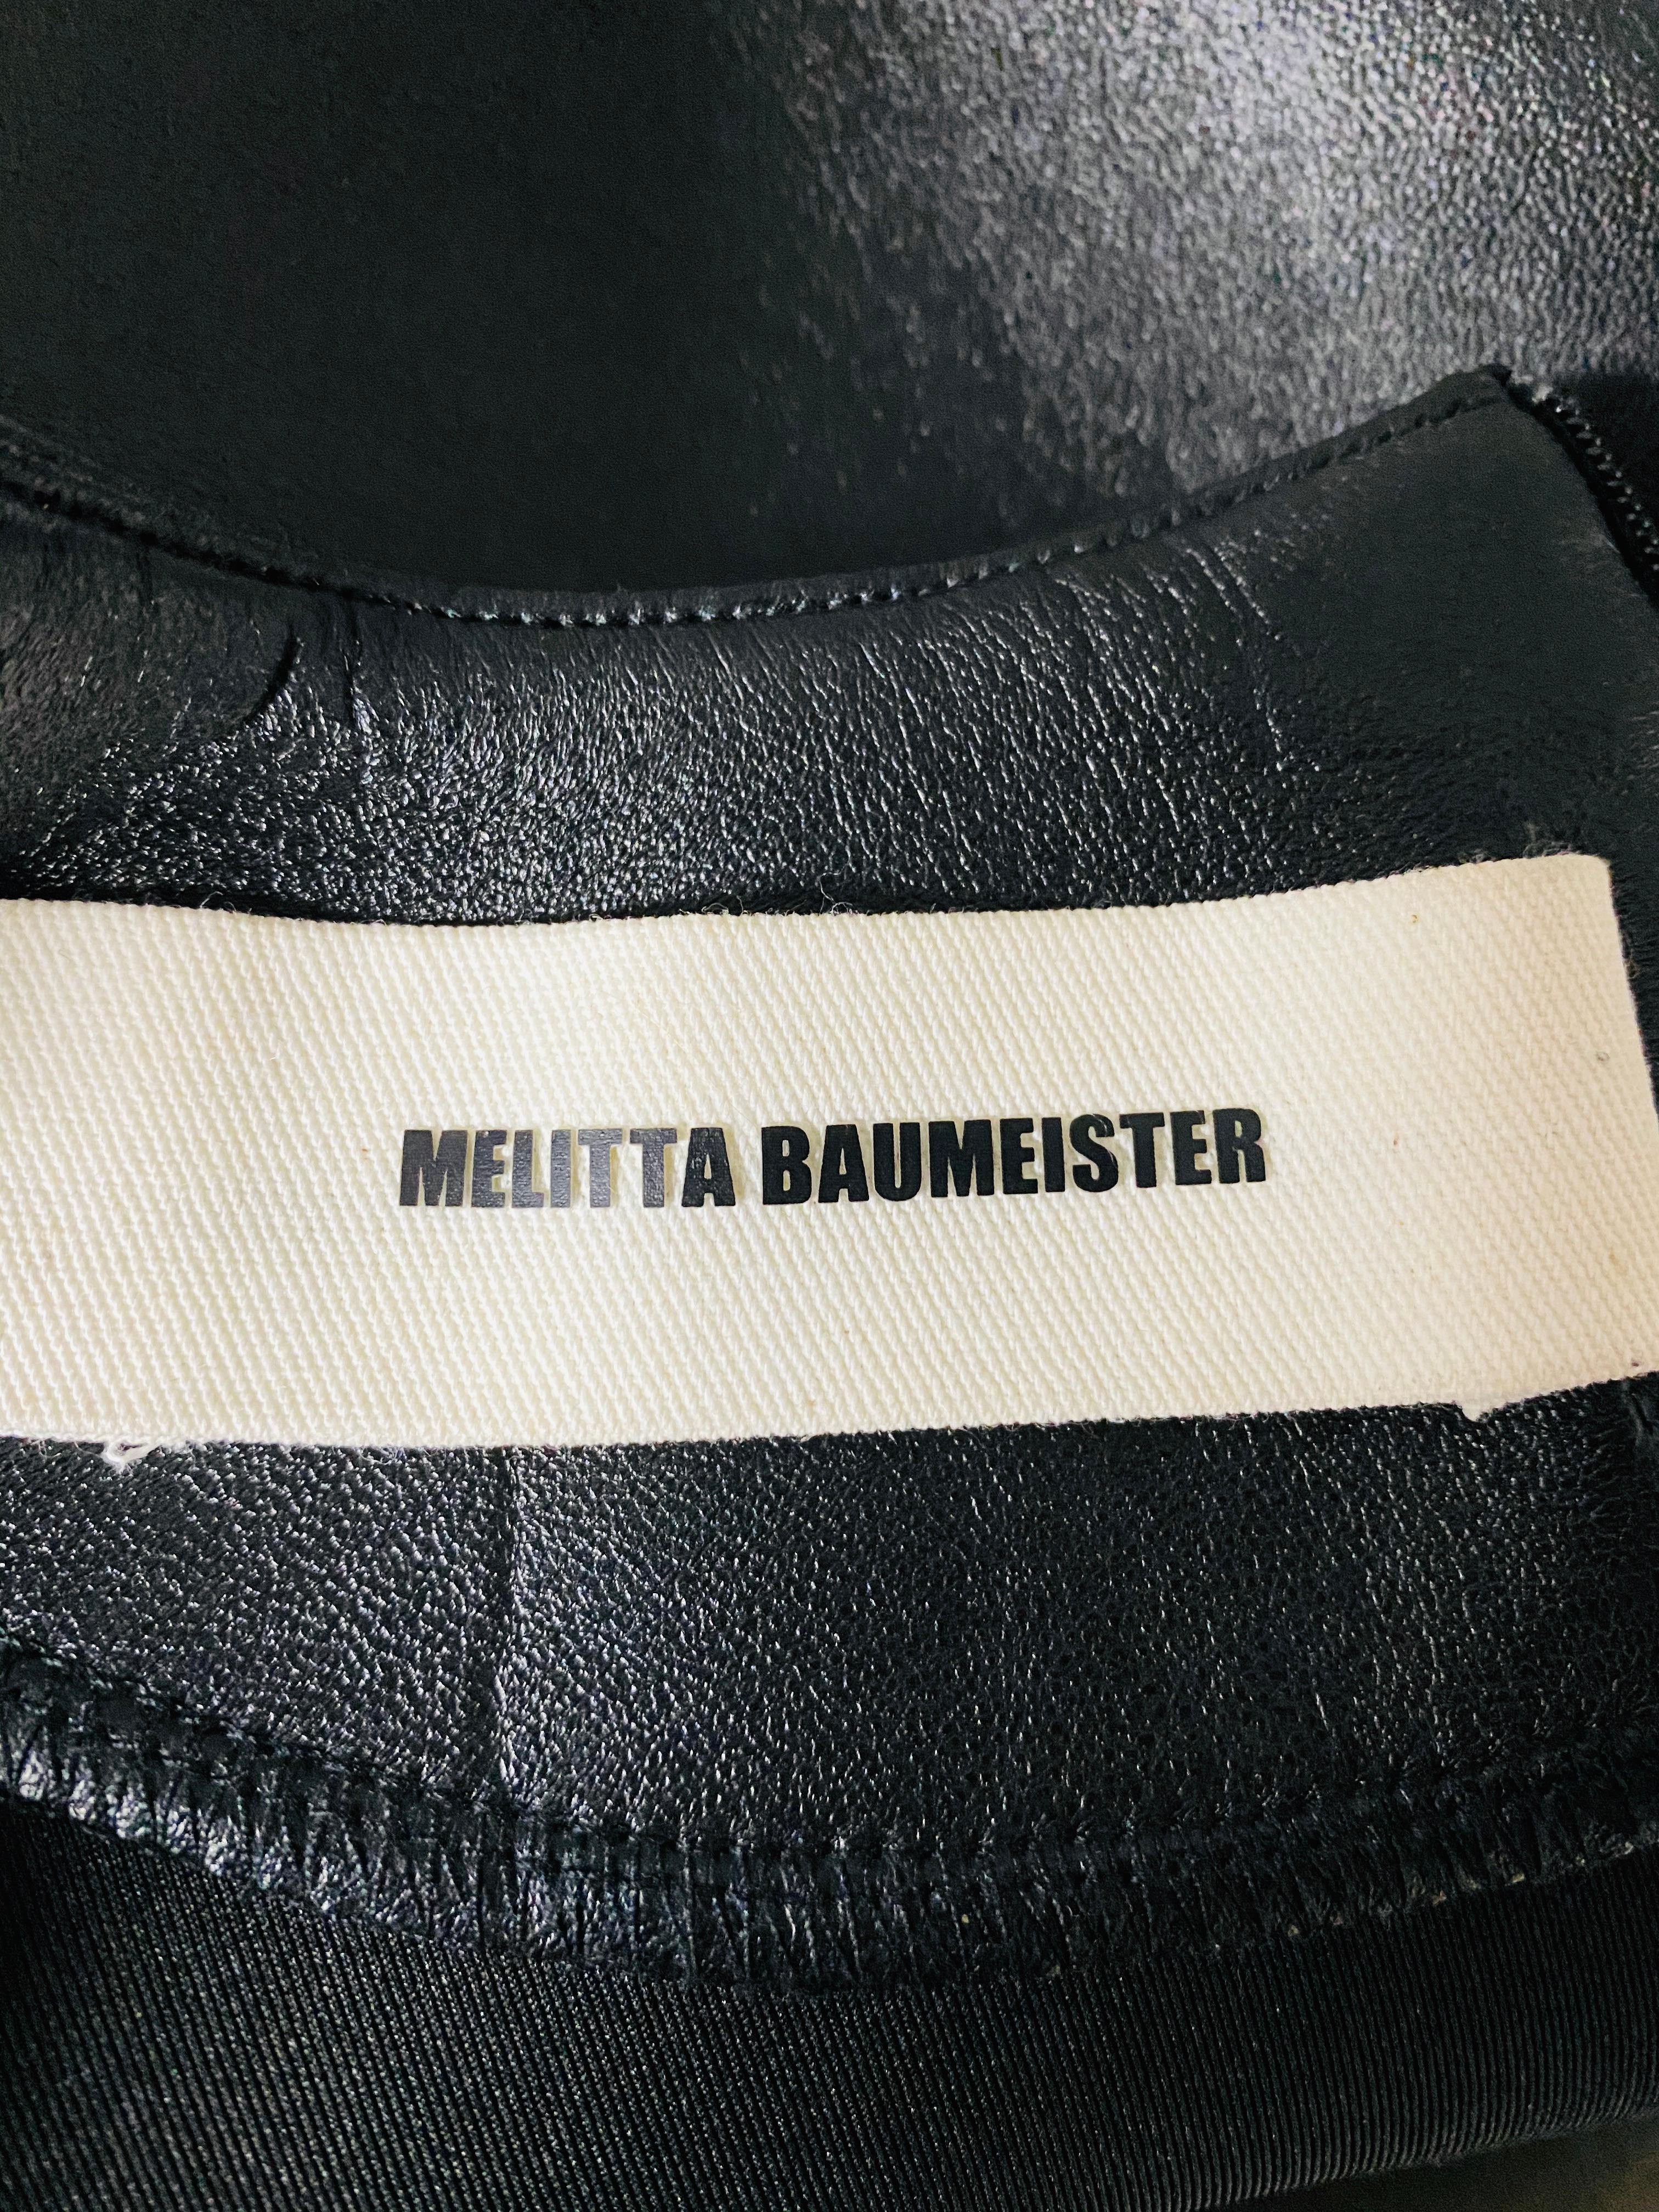 Melitta Baumeister Black Faux Leather Sleeveless Maxi Dress For Sale at ...